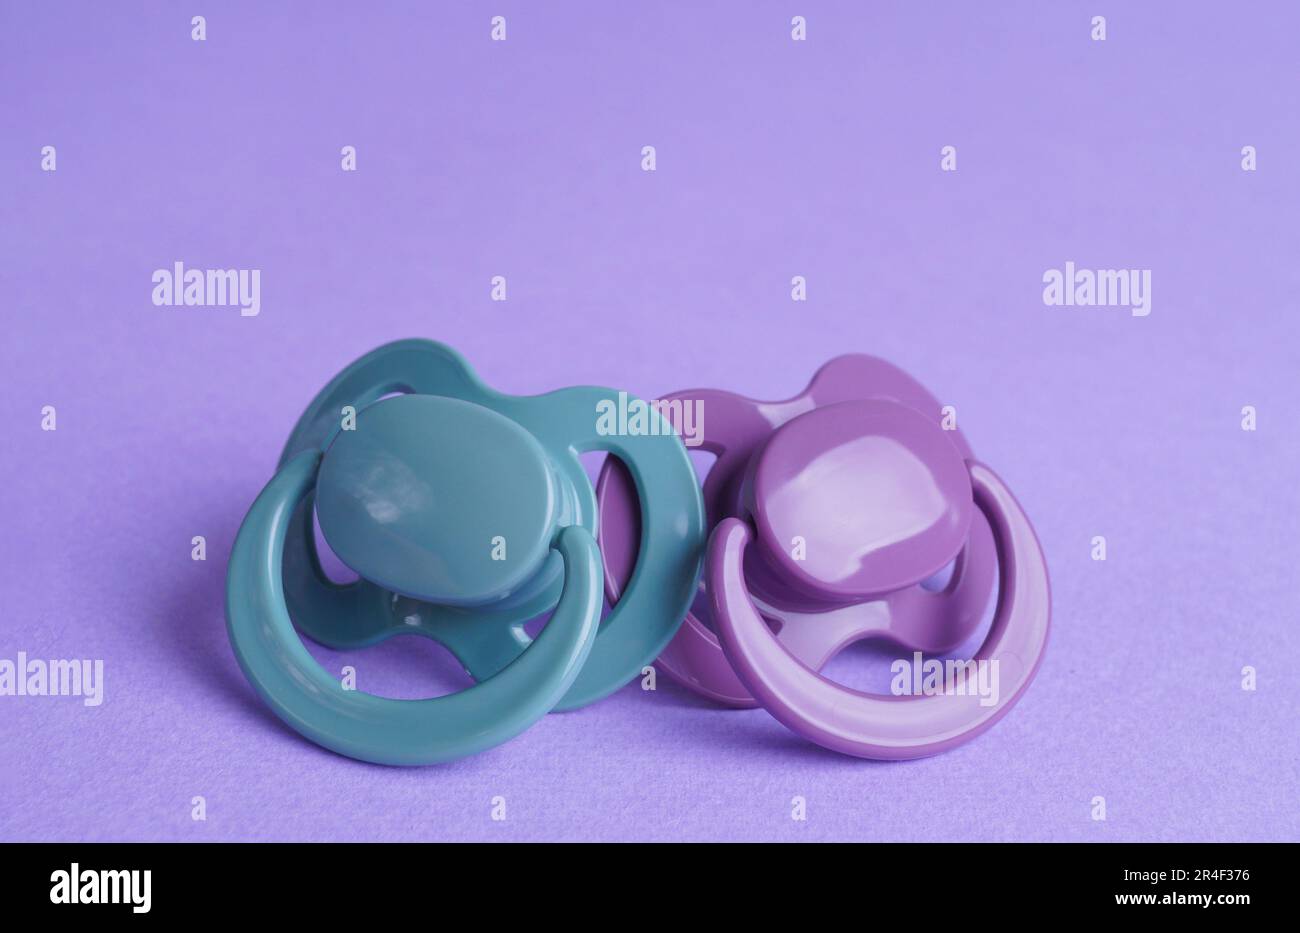 New baby pacifiers on purple background, closeup Stock Photo